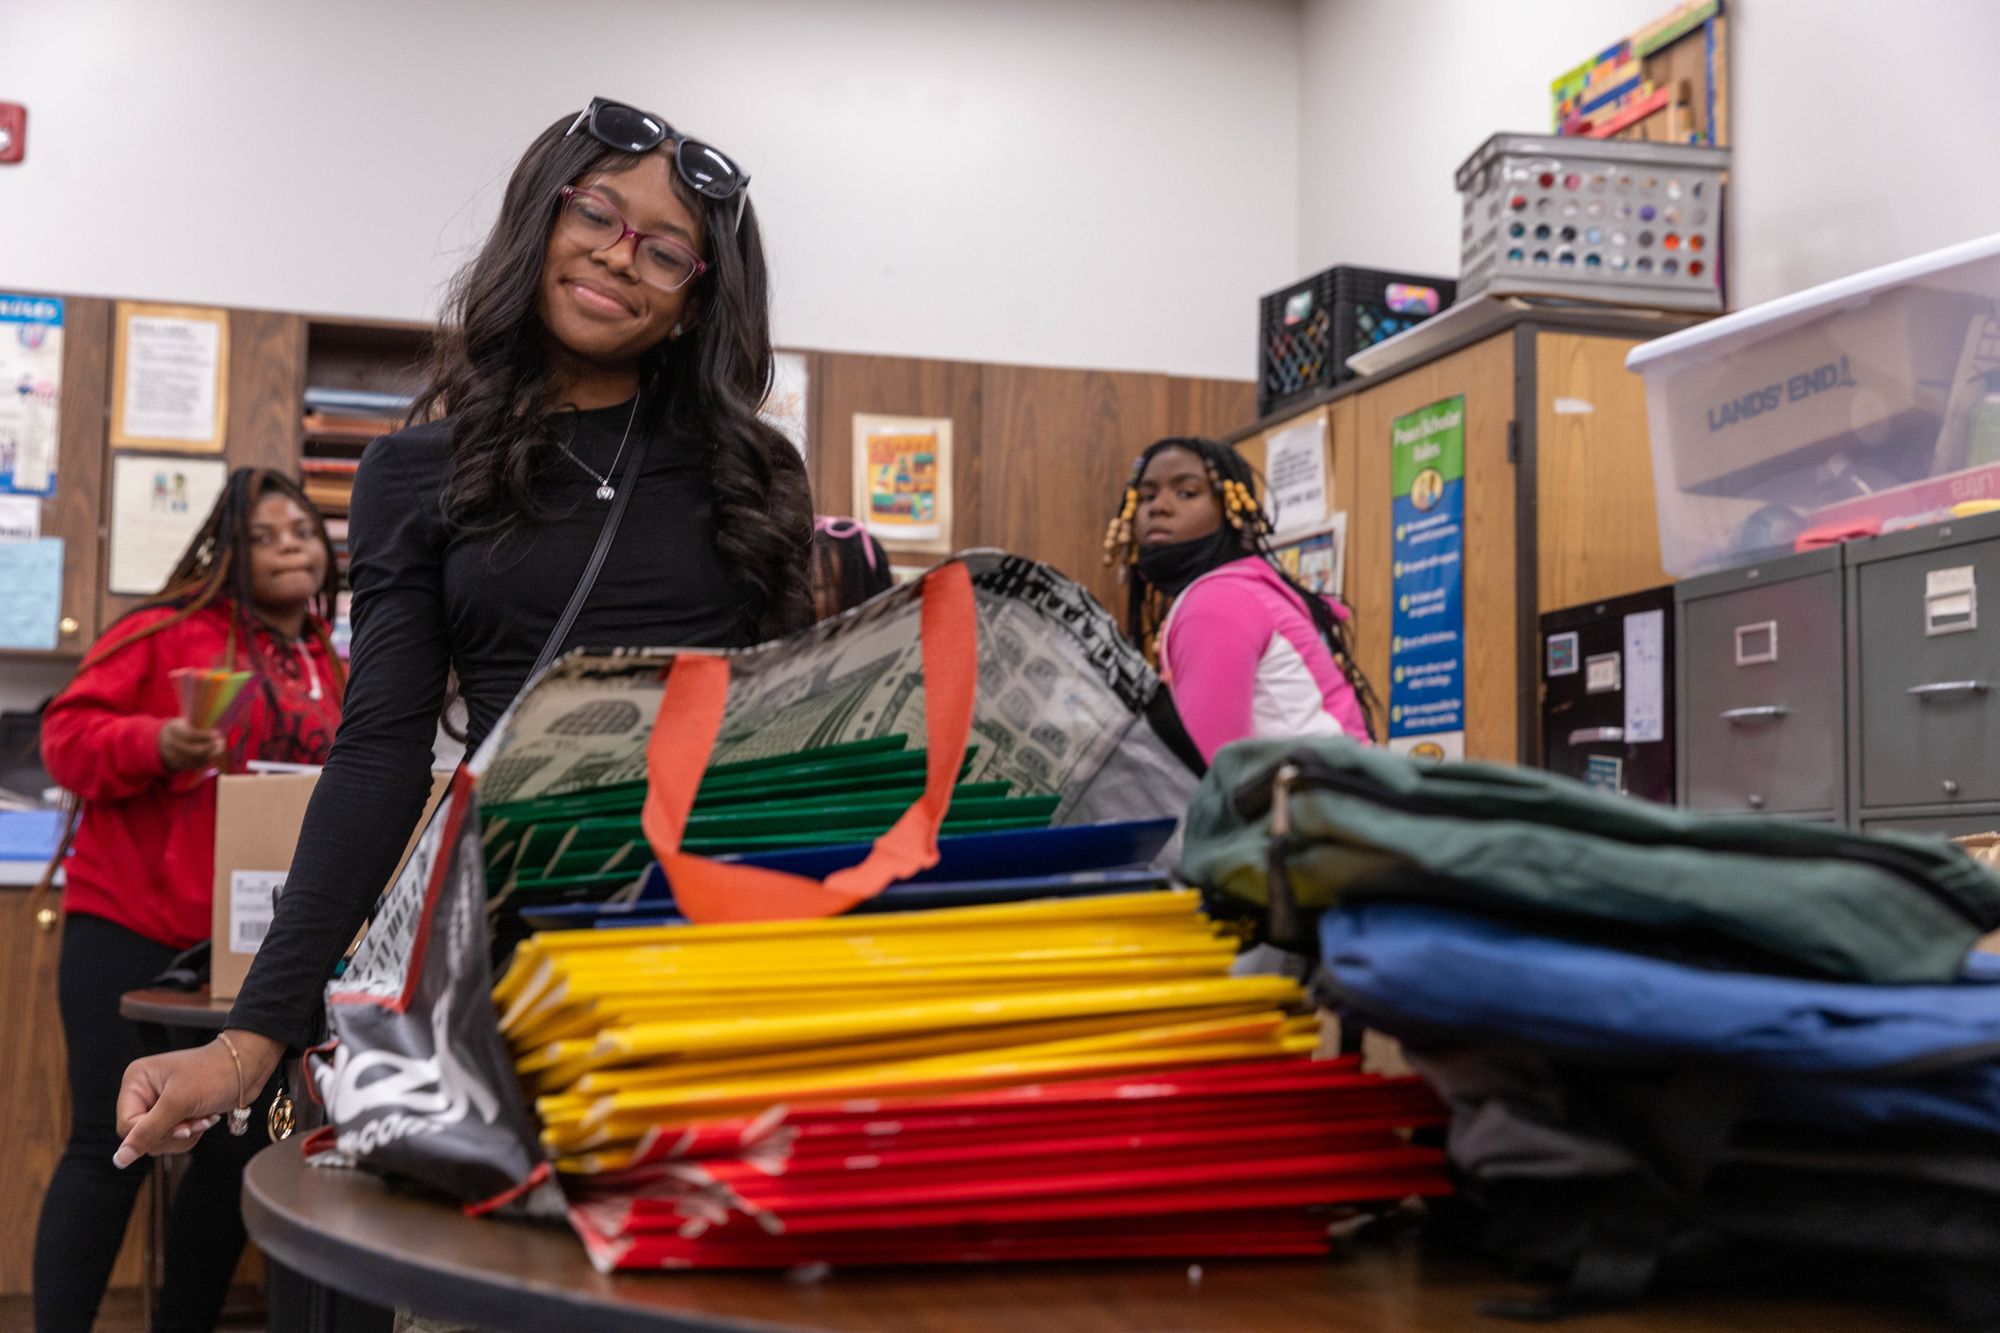 A color landscape photograph of a student volunteer taking a break from loading up backpacks with donated school supplies.